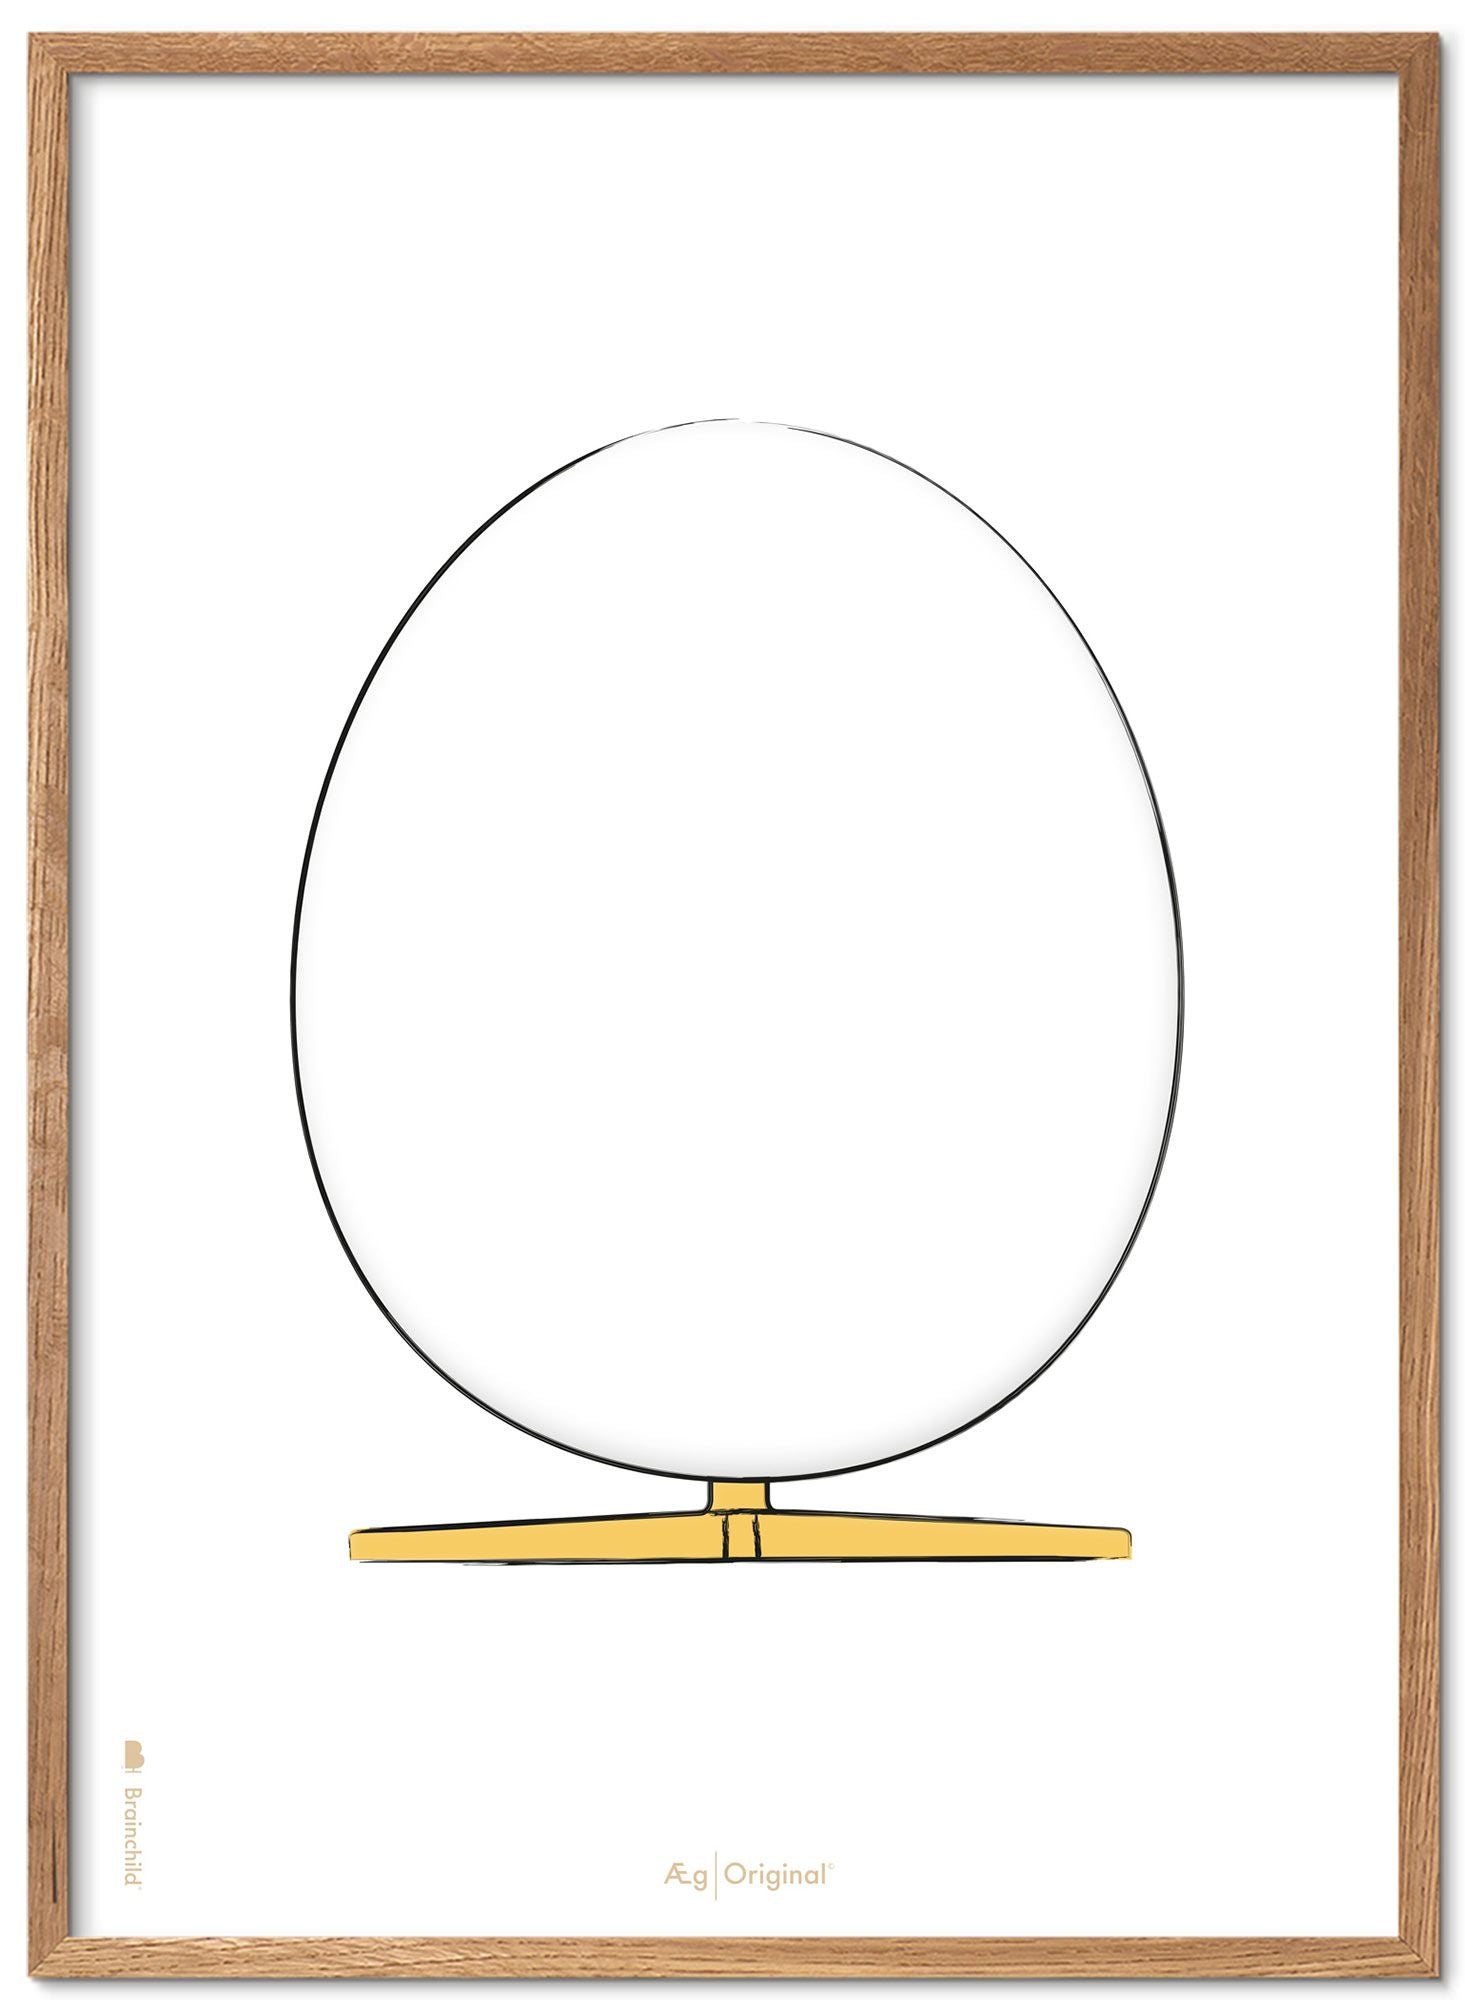 Brainchild The Egg Design Sketch Poster With Frame Made Of Light Wood A5, White Background